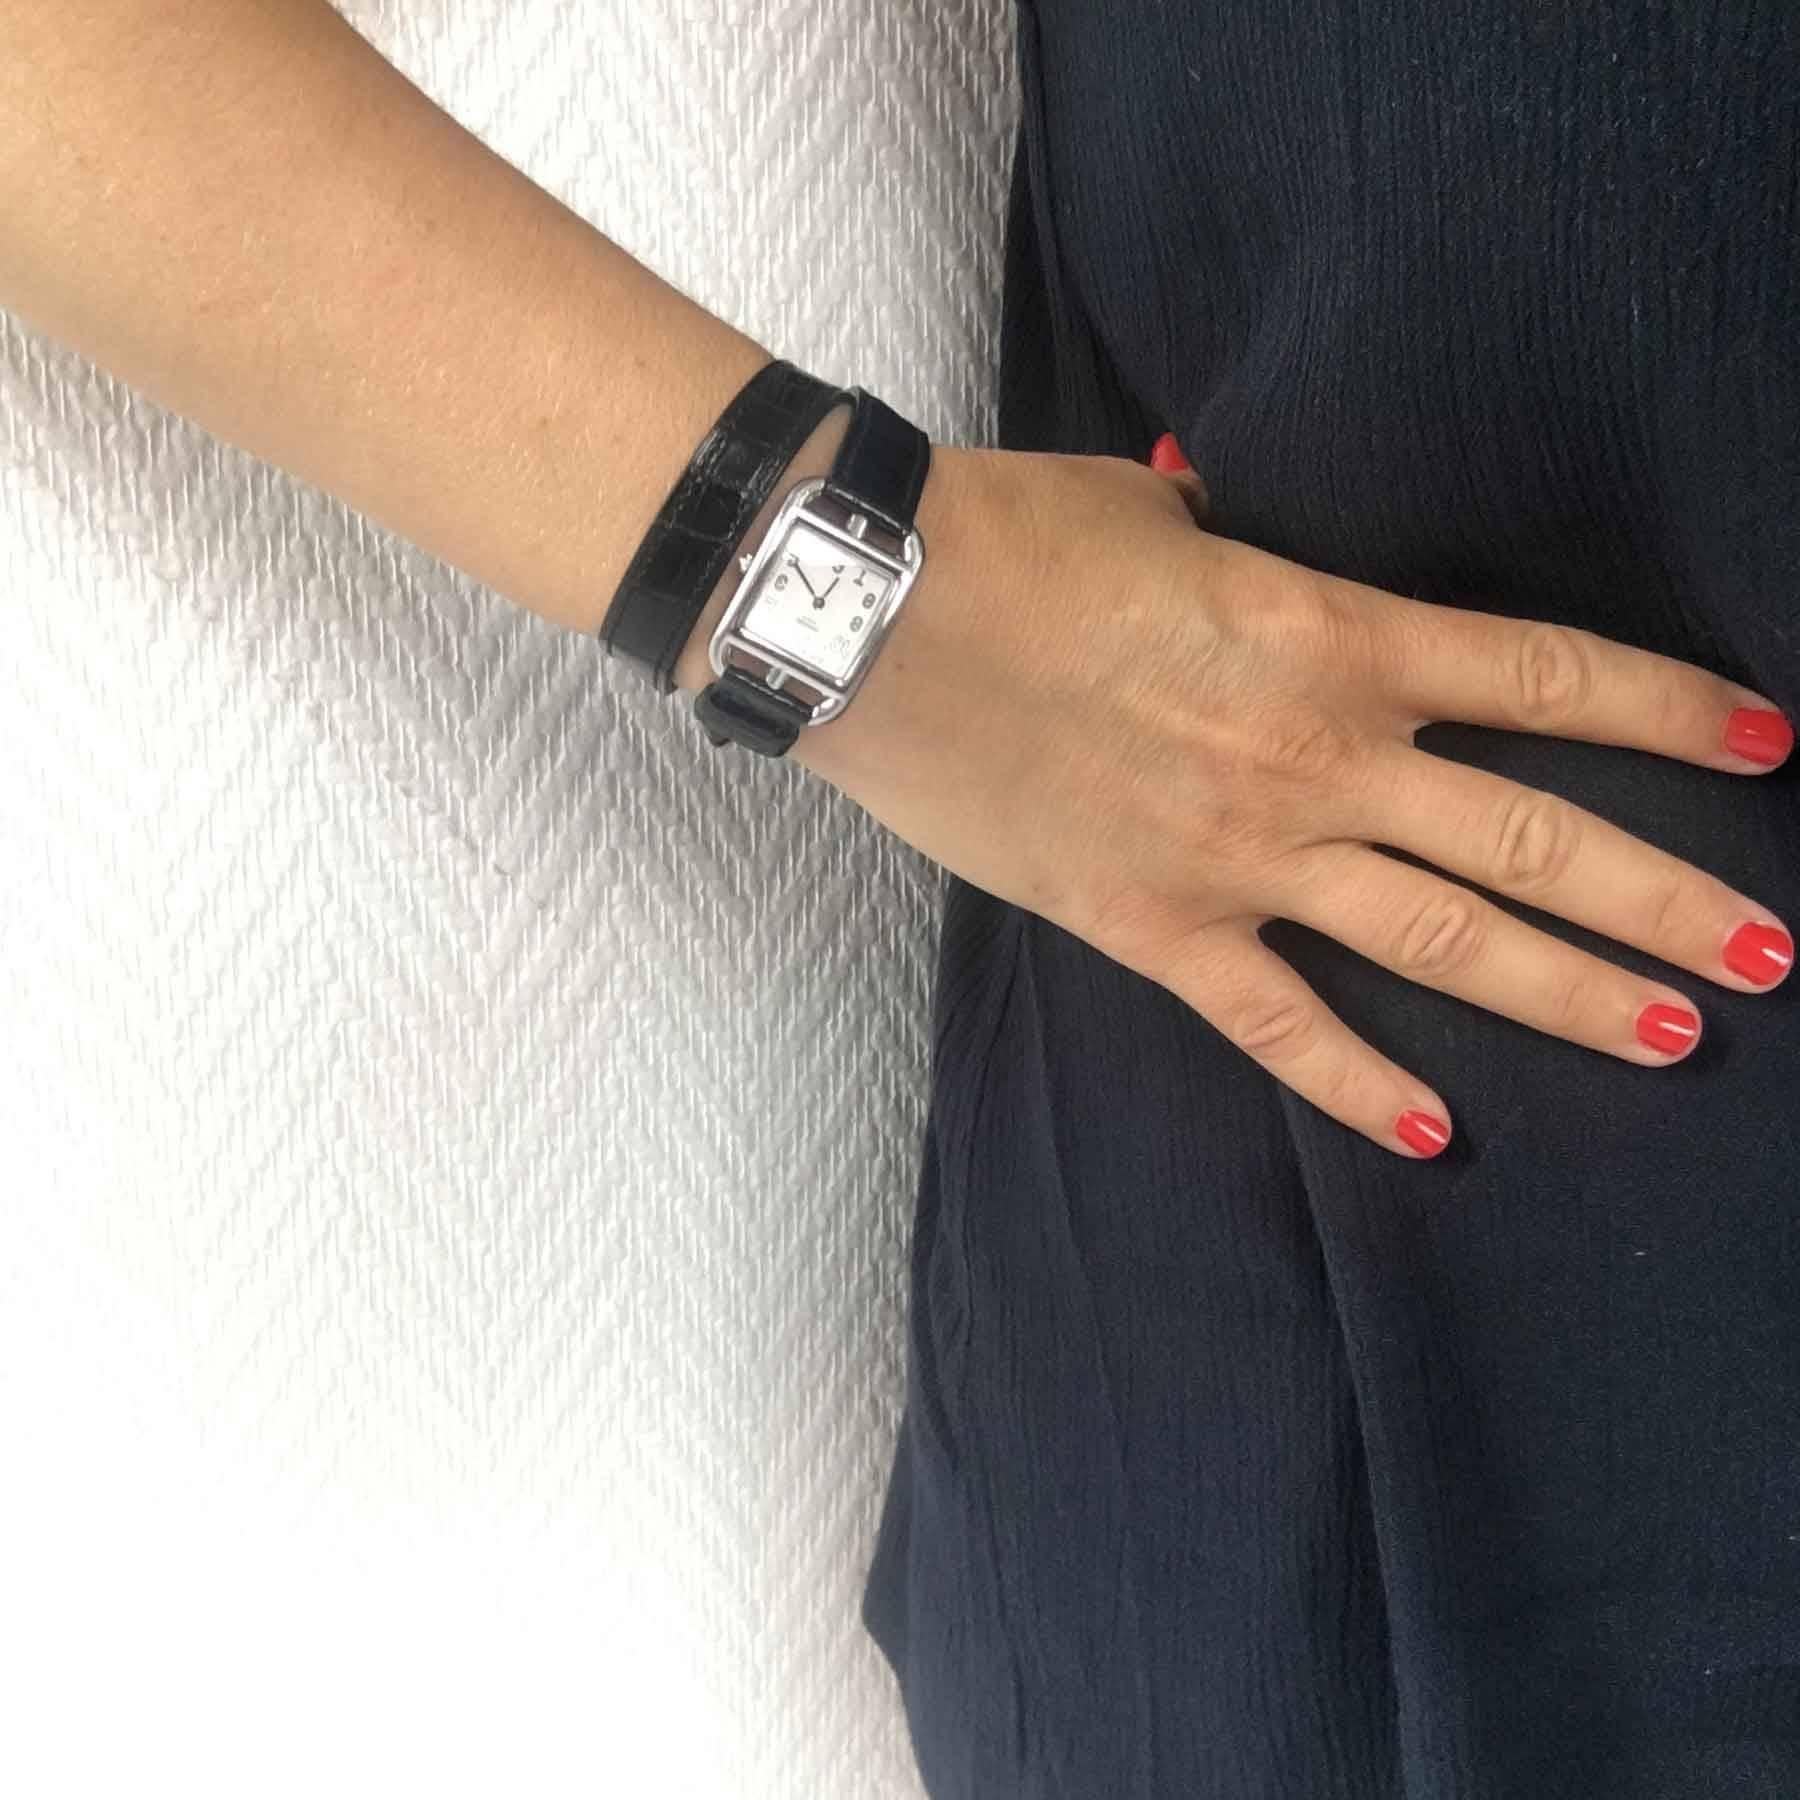 Hermès watch model 'Cape Cod' small model. Double loop bracelet in black Mississippi alligator. Quartz movement, steel case, sapphire crystal, opaline silver metal dial.
Water resistant to 30 m. Made in Switzerland. Some micro scratches on the